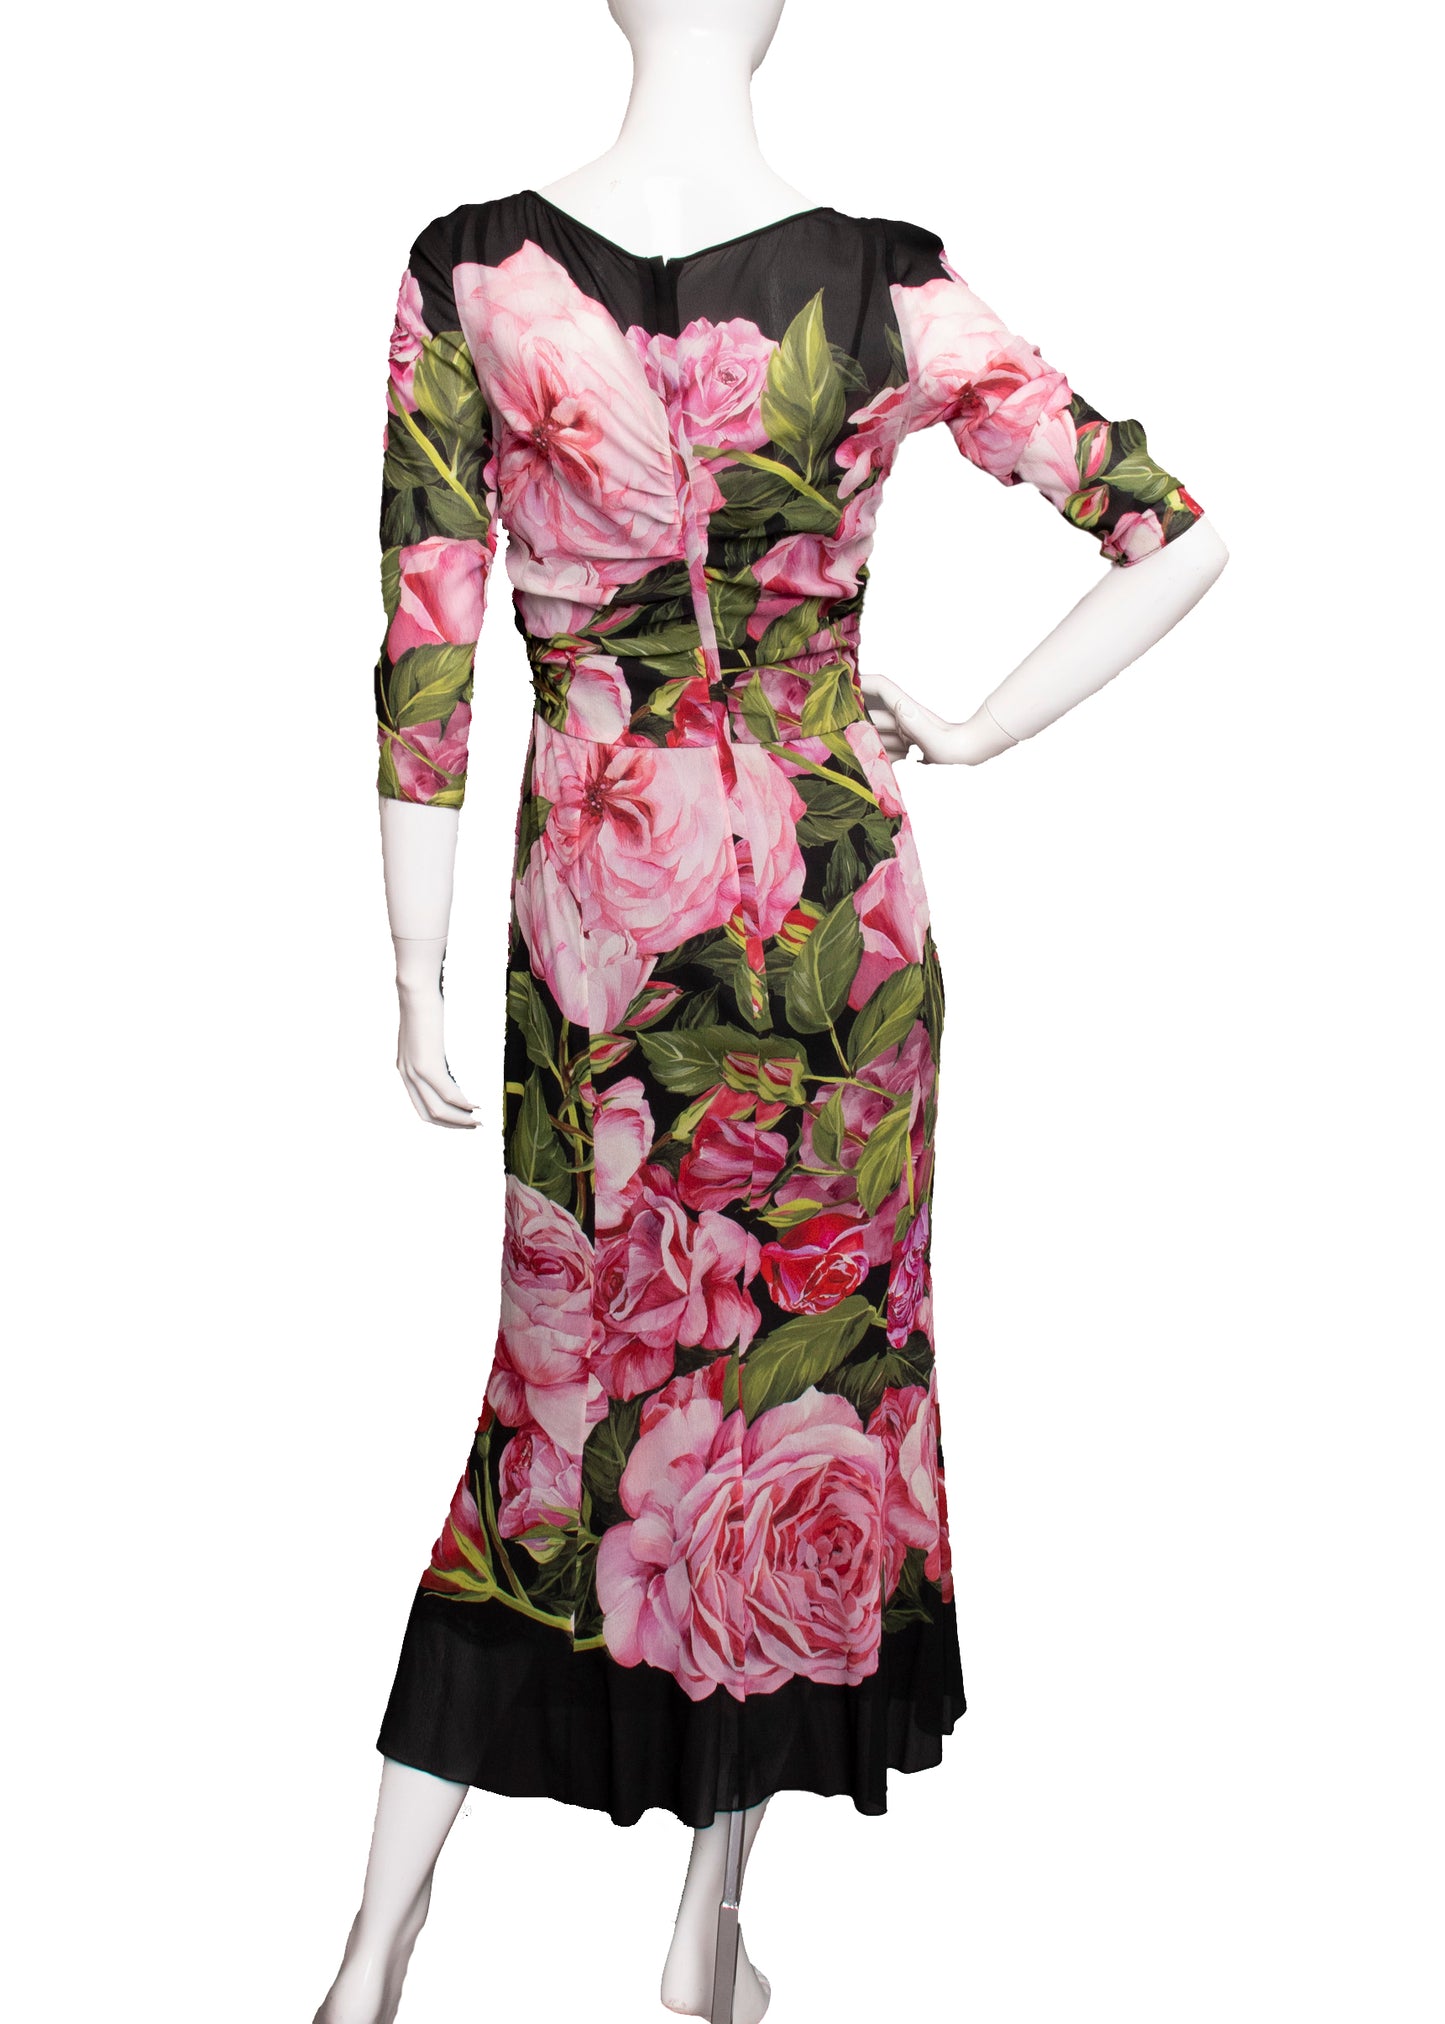 90s Dolce and Gabbana Floral Dress S/M